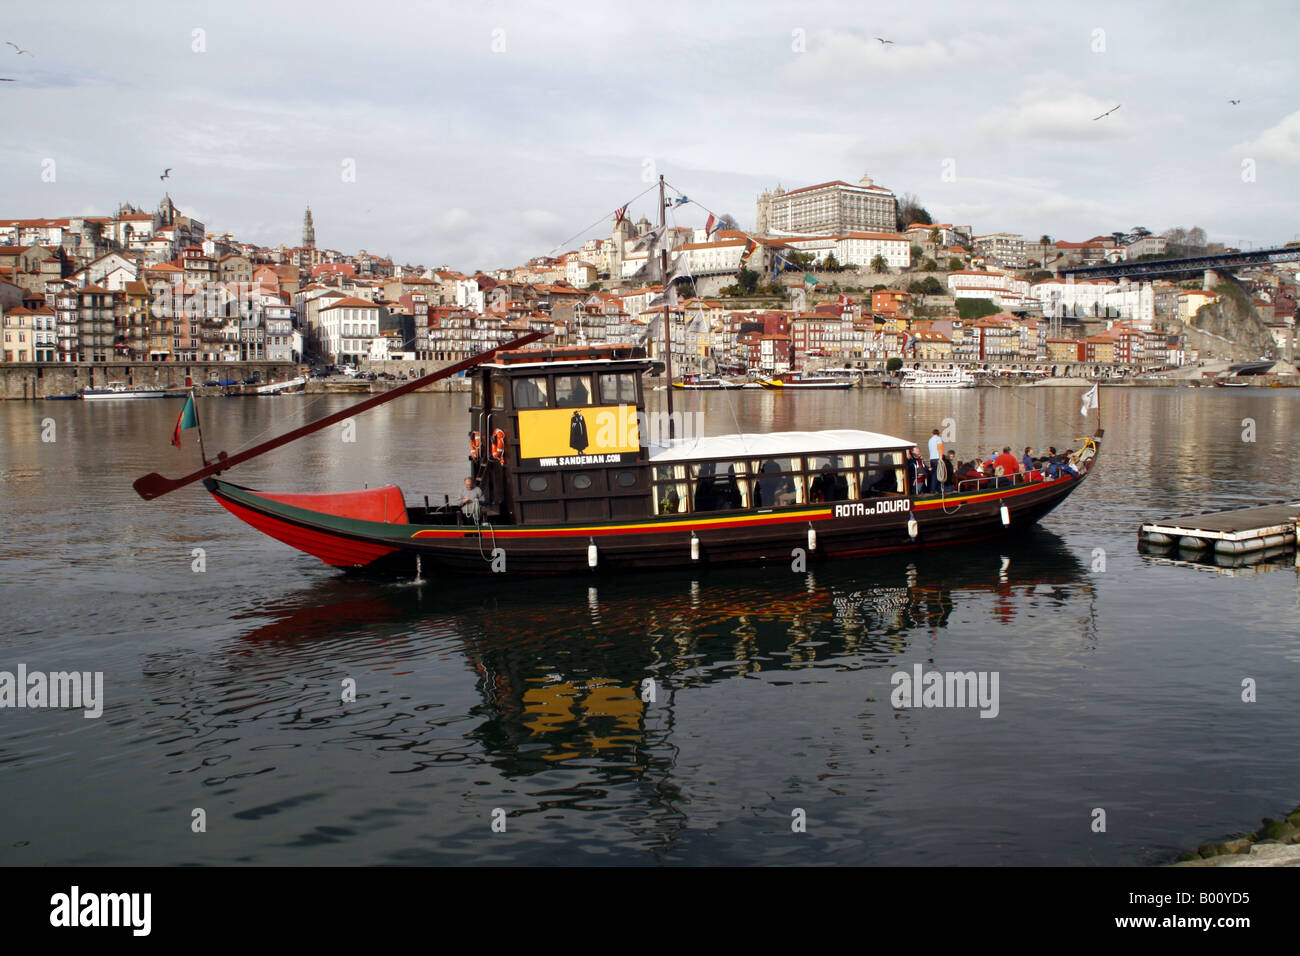 Sandeman boat now used for river trips for tourists. Porto, Portugal Stock Photo